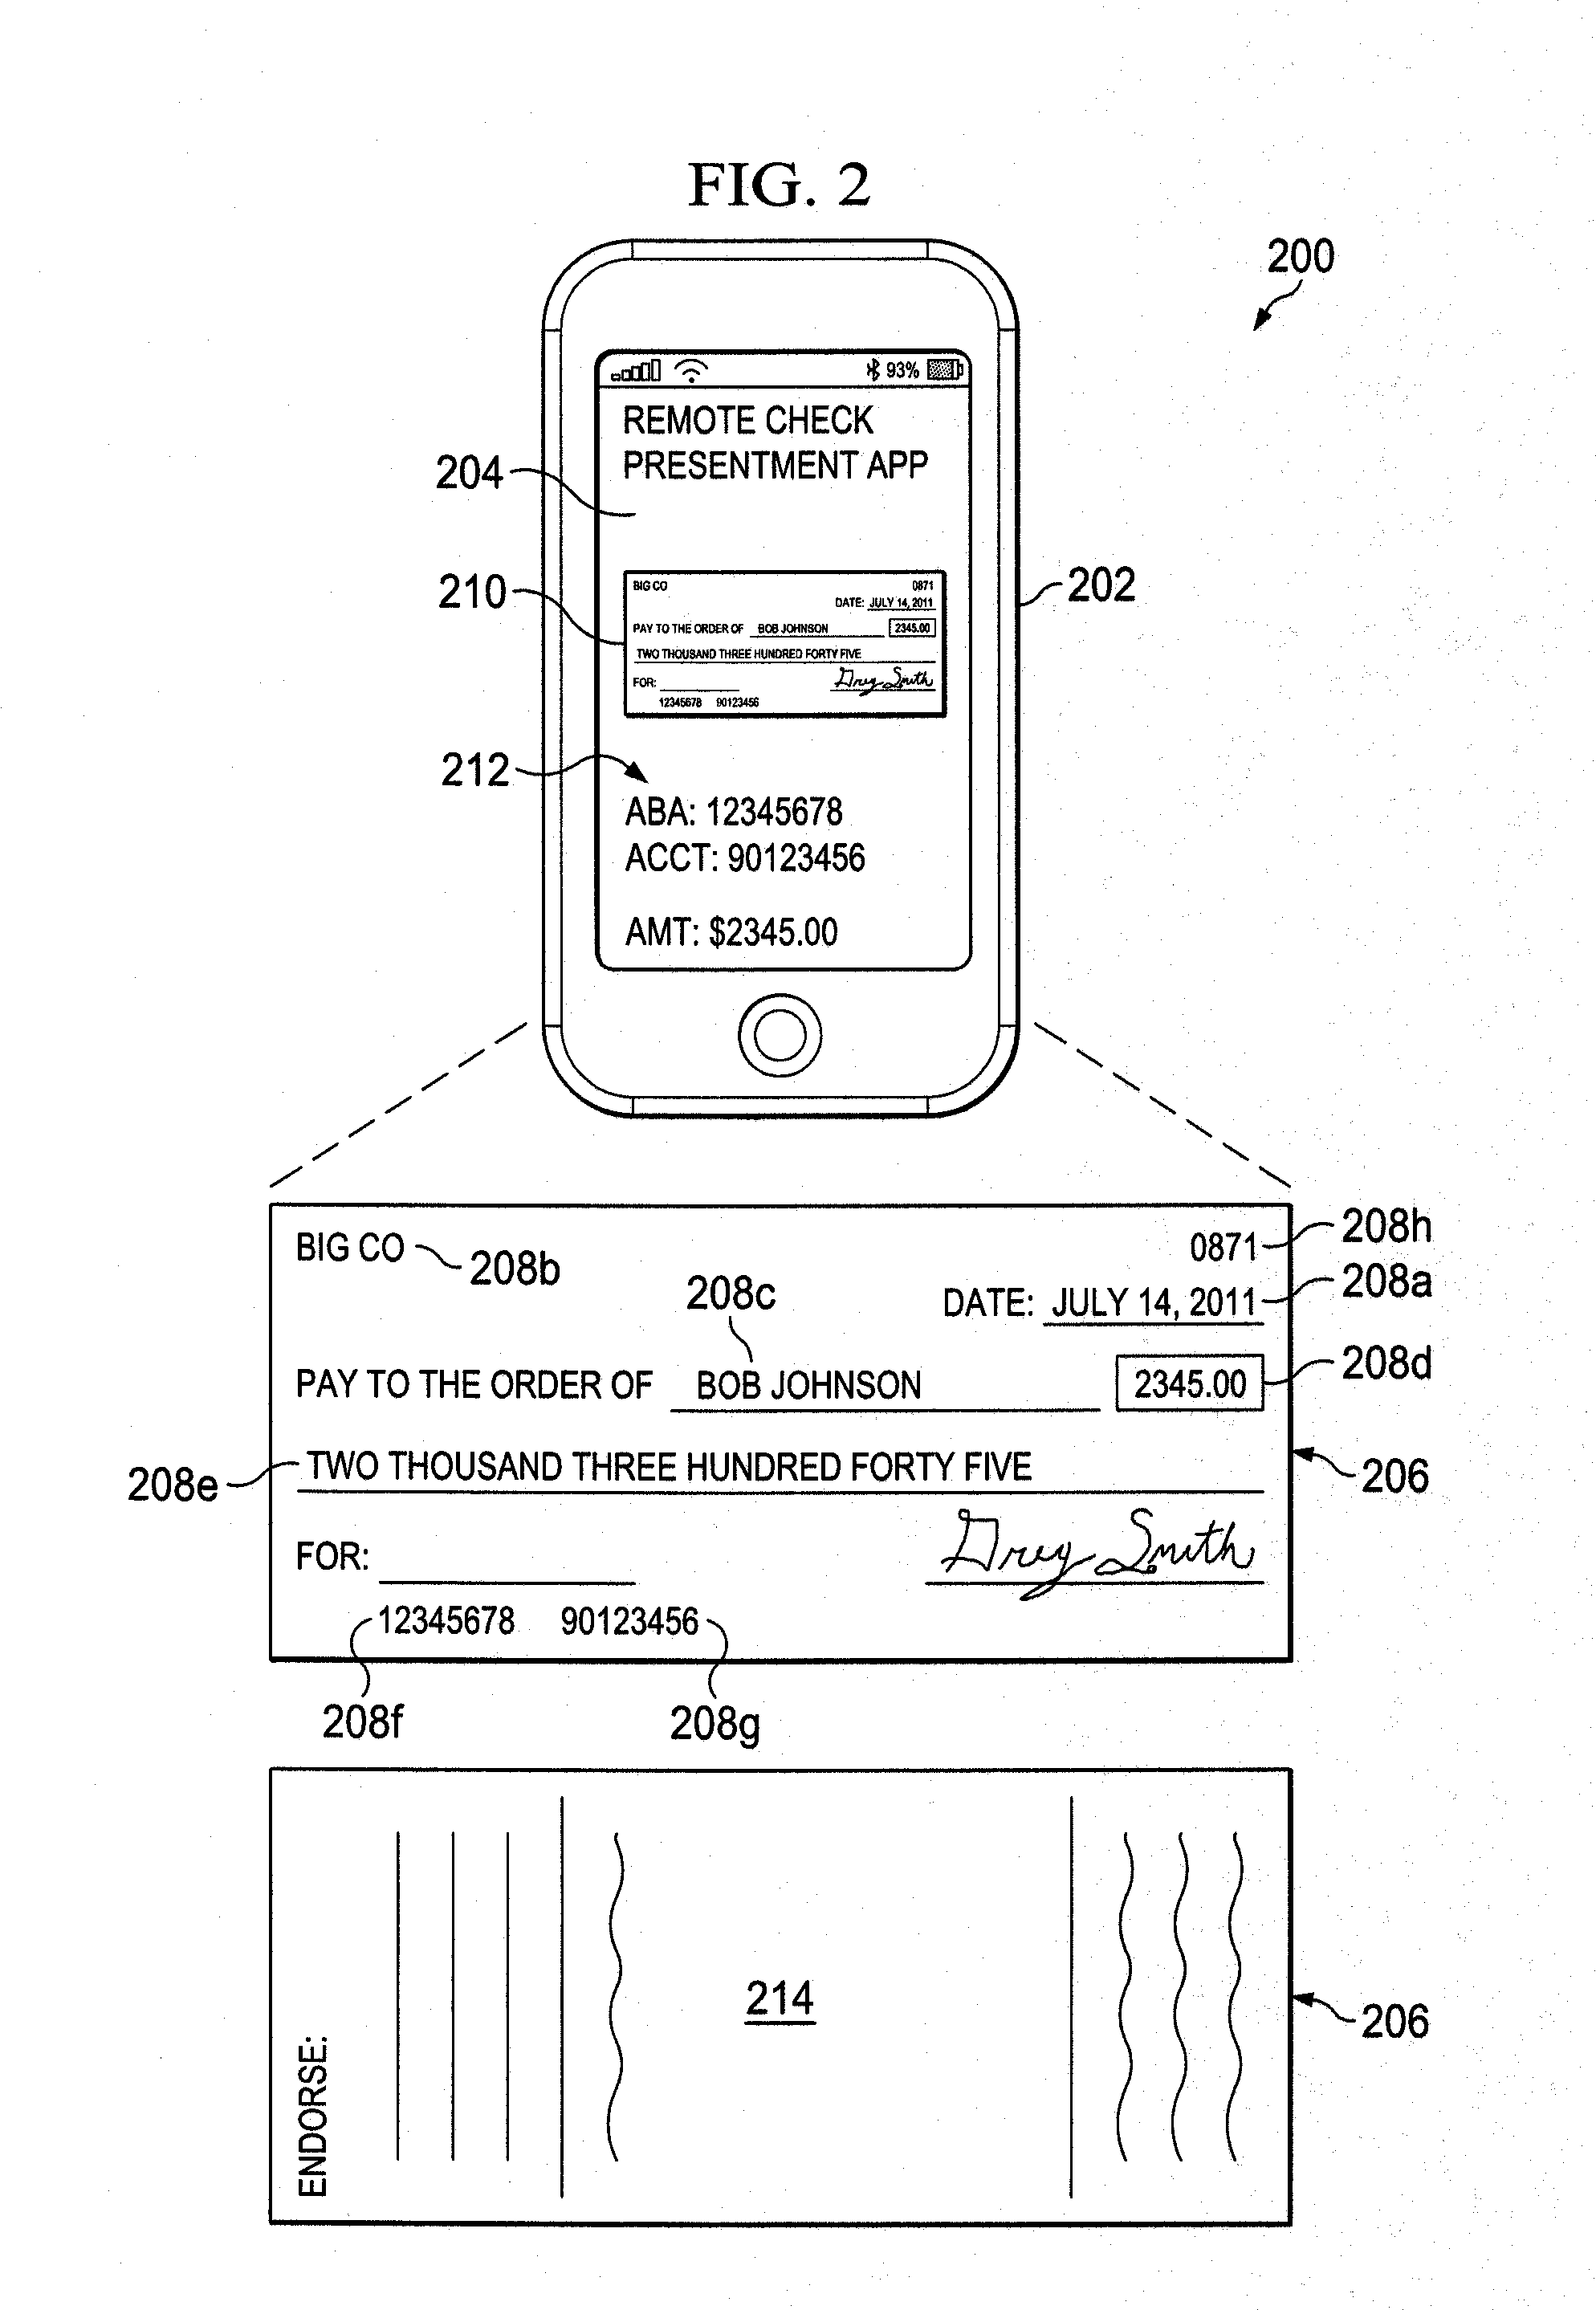 System and method for performing remote check presentment (RCP) transactions by a check cashing company